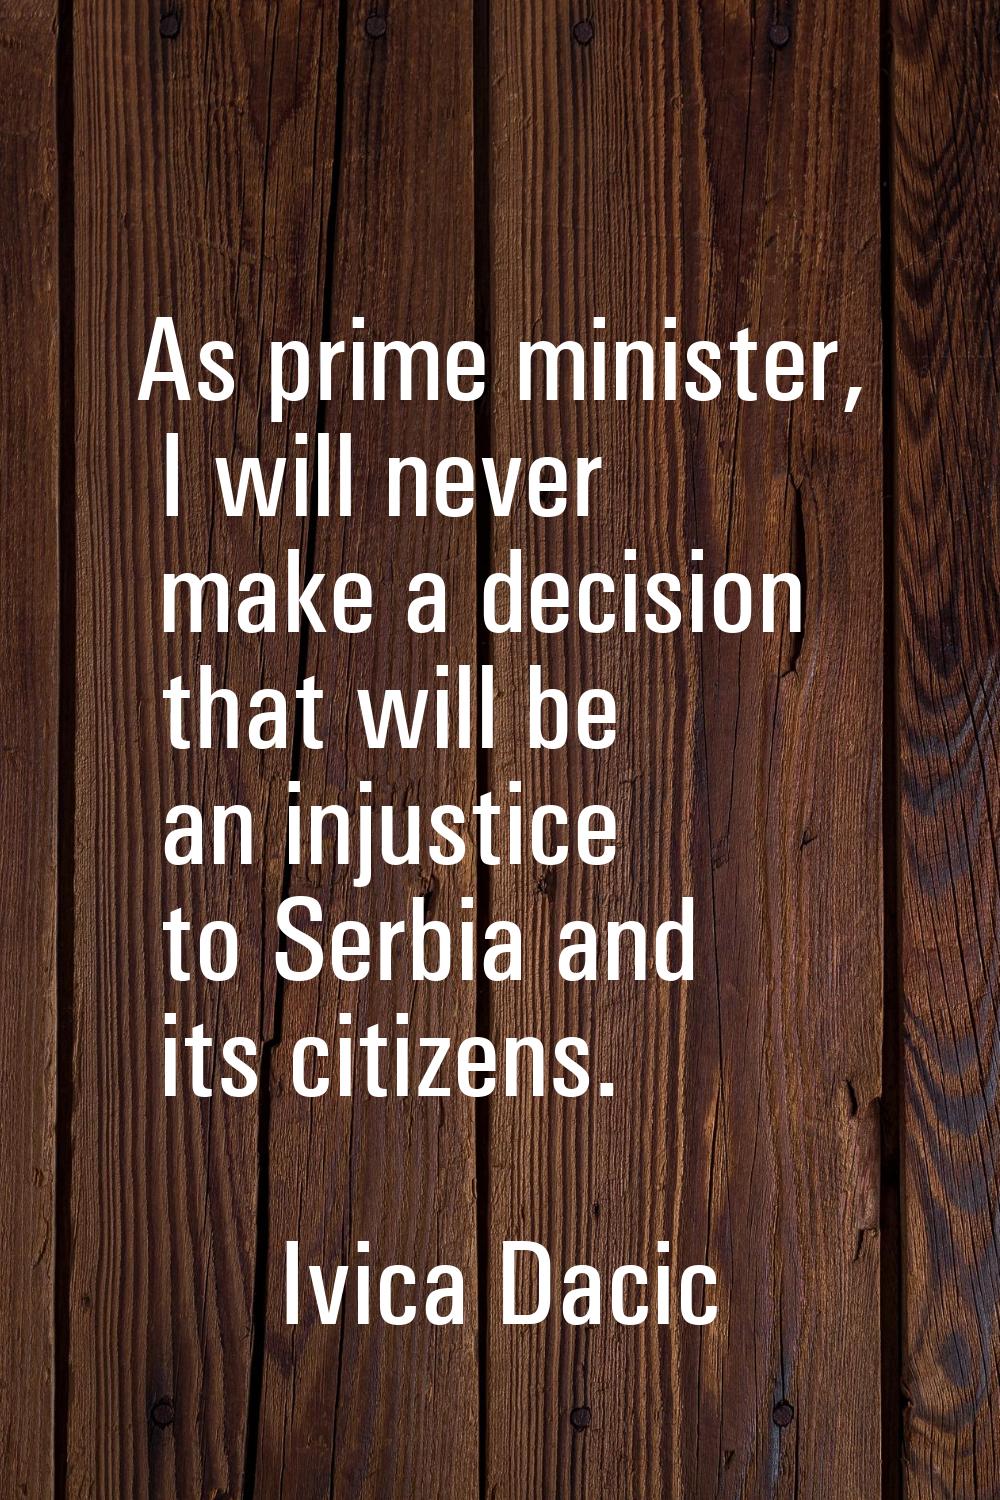 As prime minister, I will never make a decision that will be an injustice to Serbia and its citizen